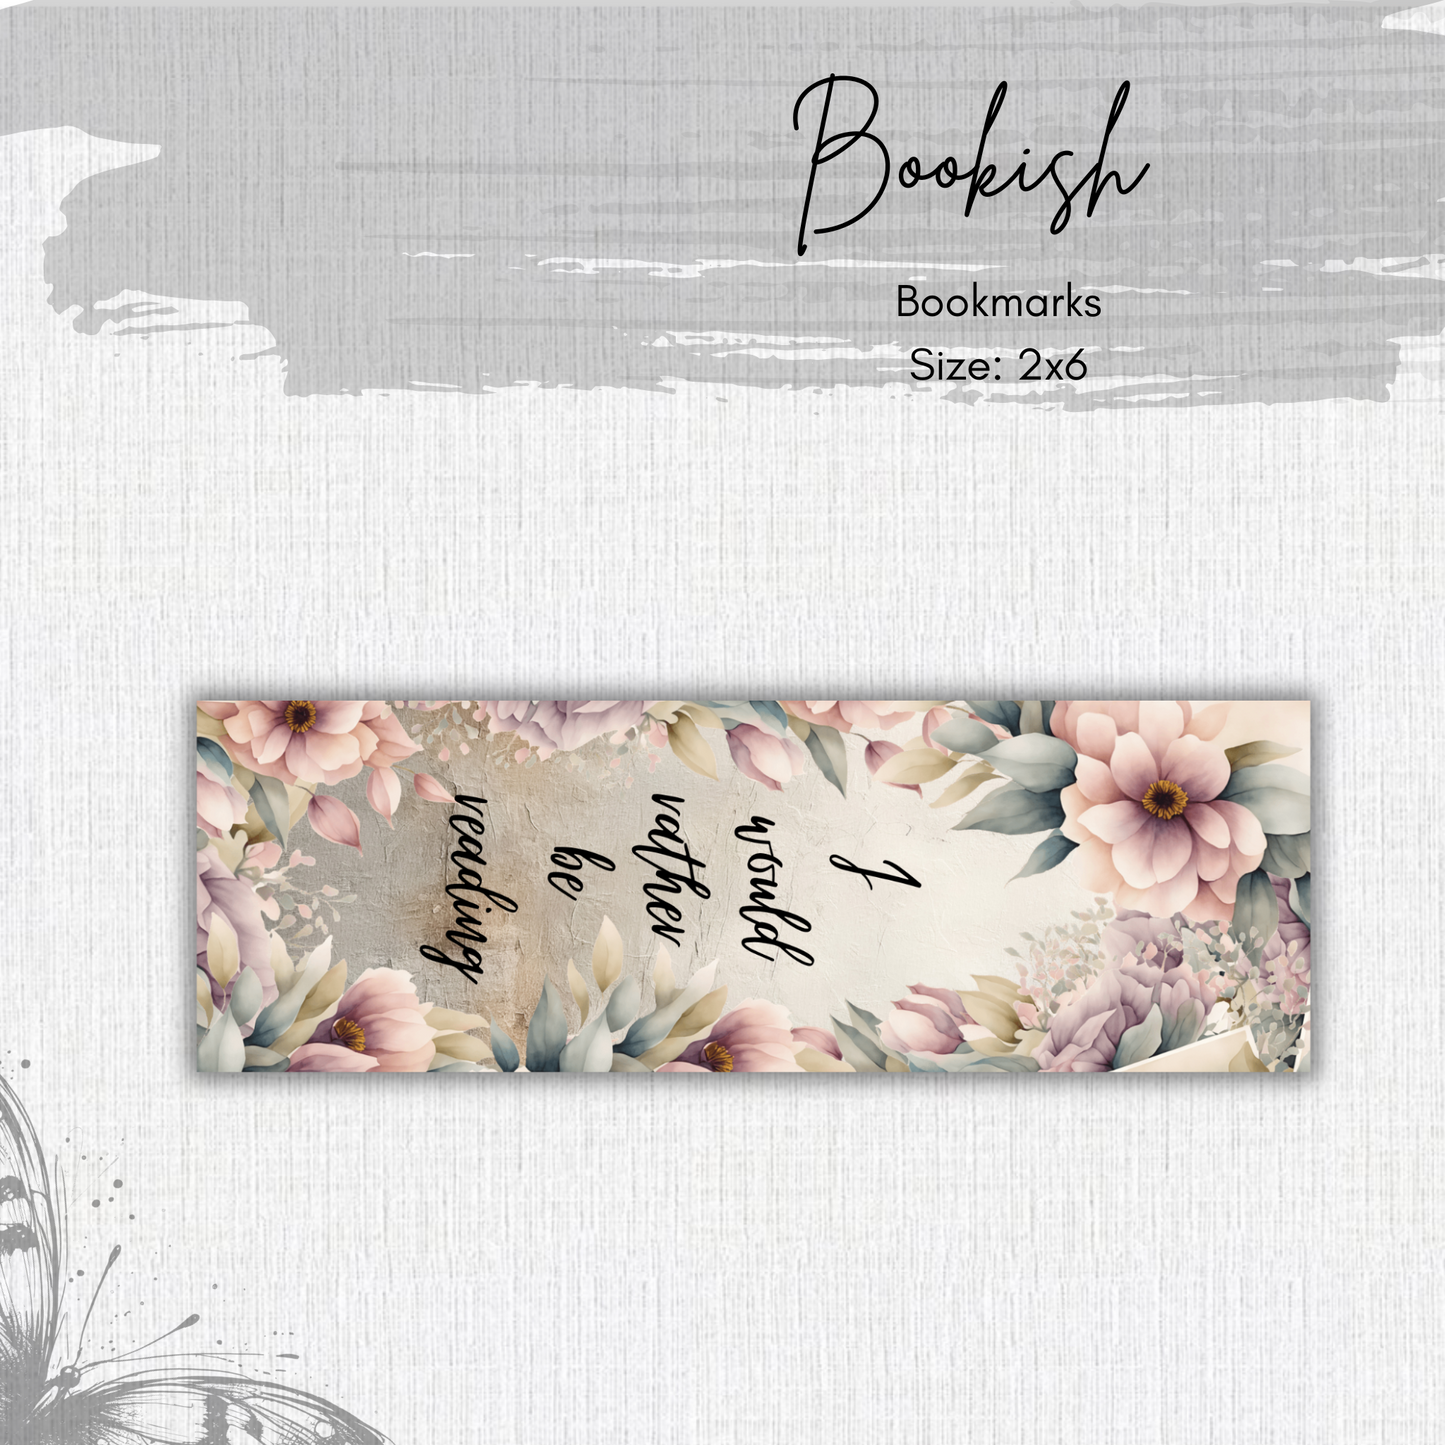 Paper Bookmark - Bookish Collection